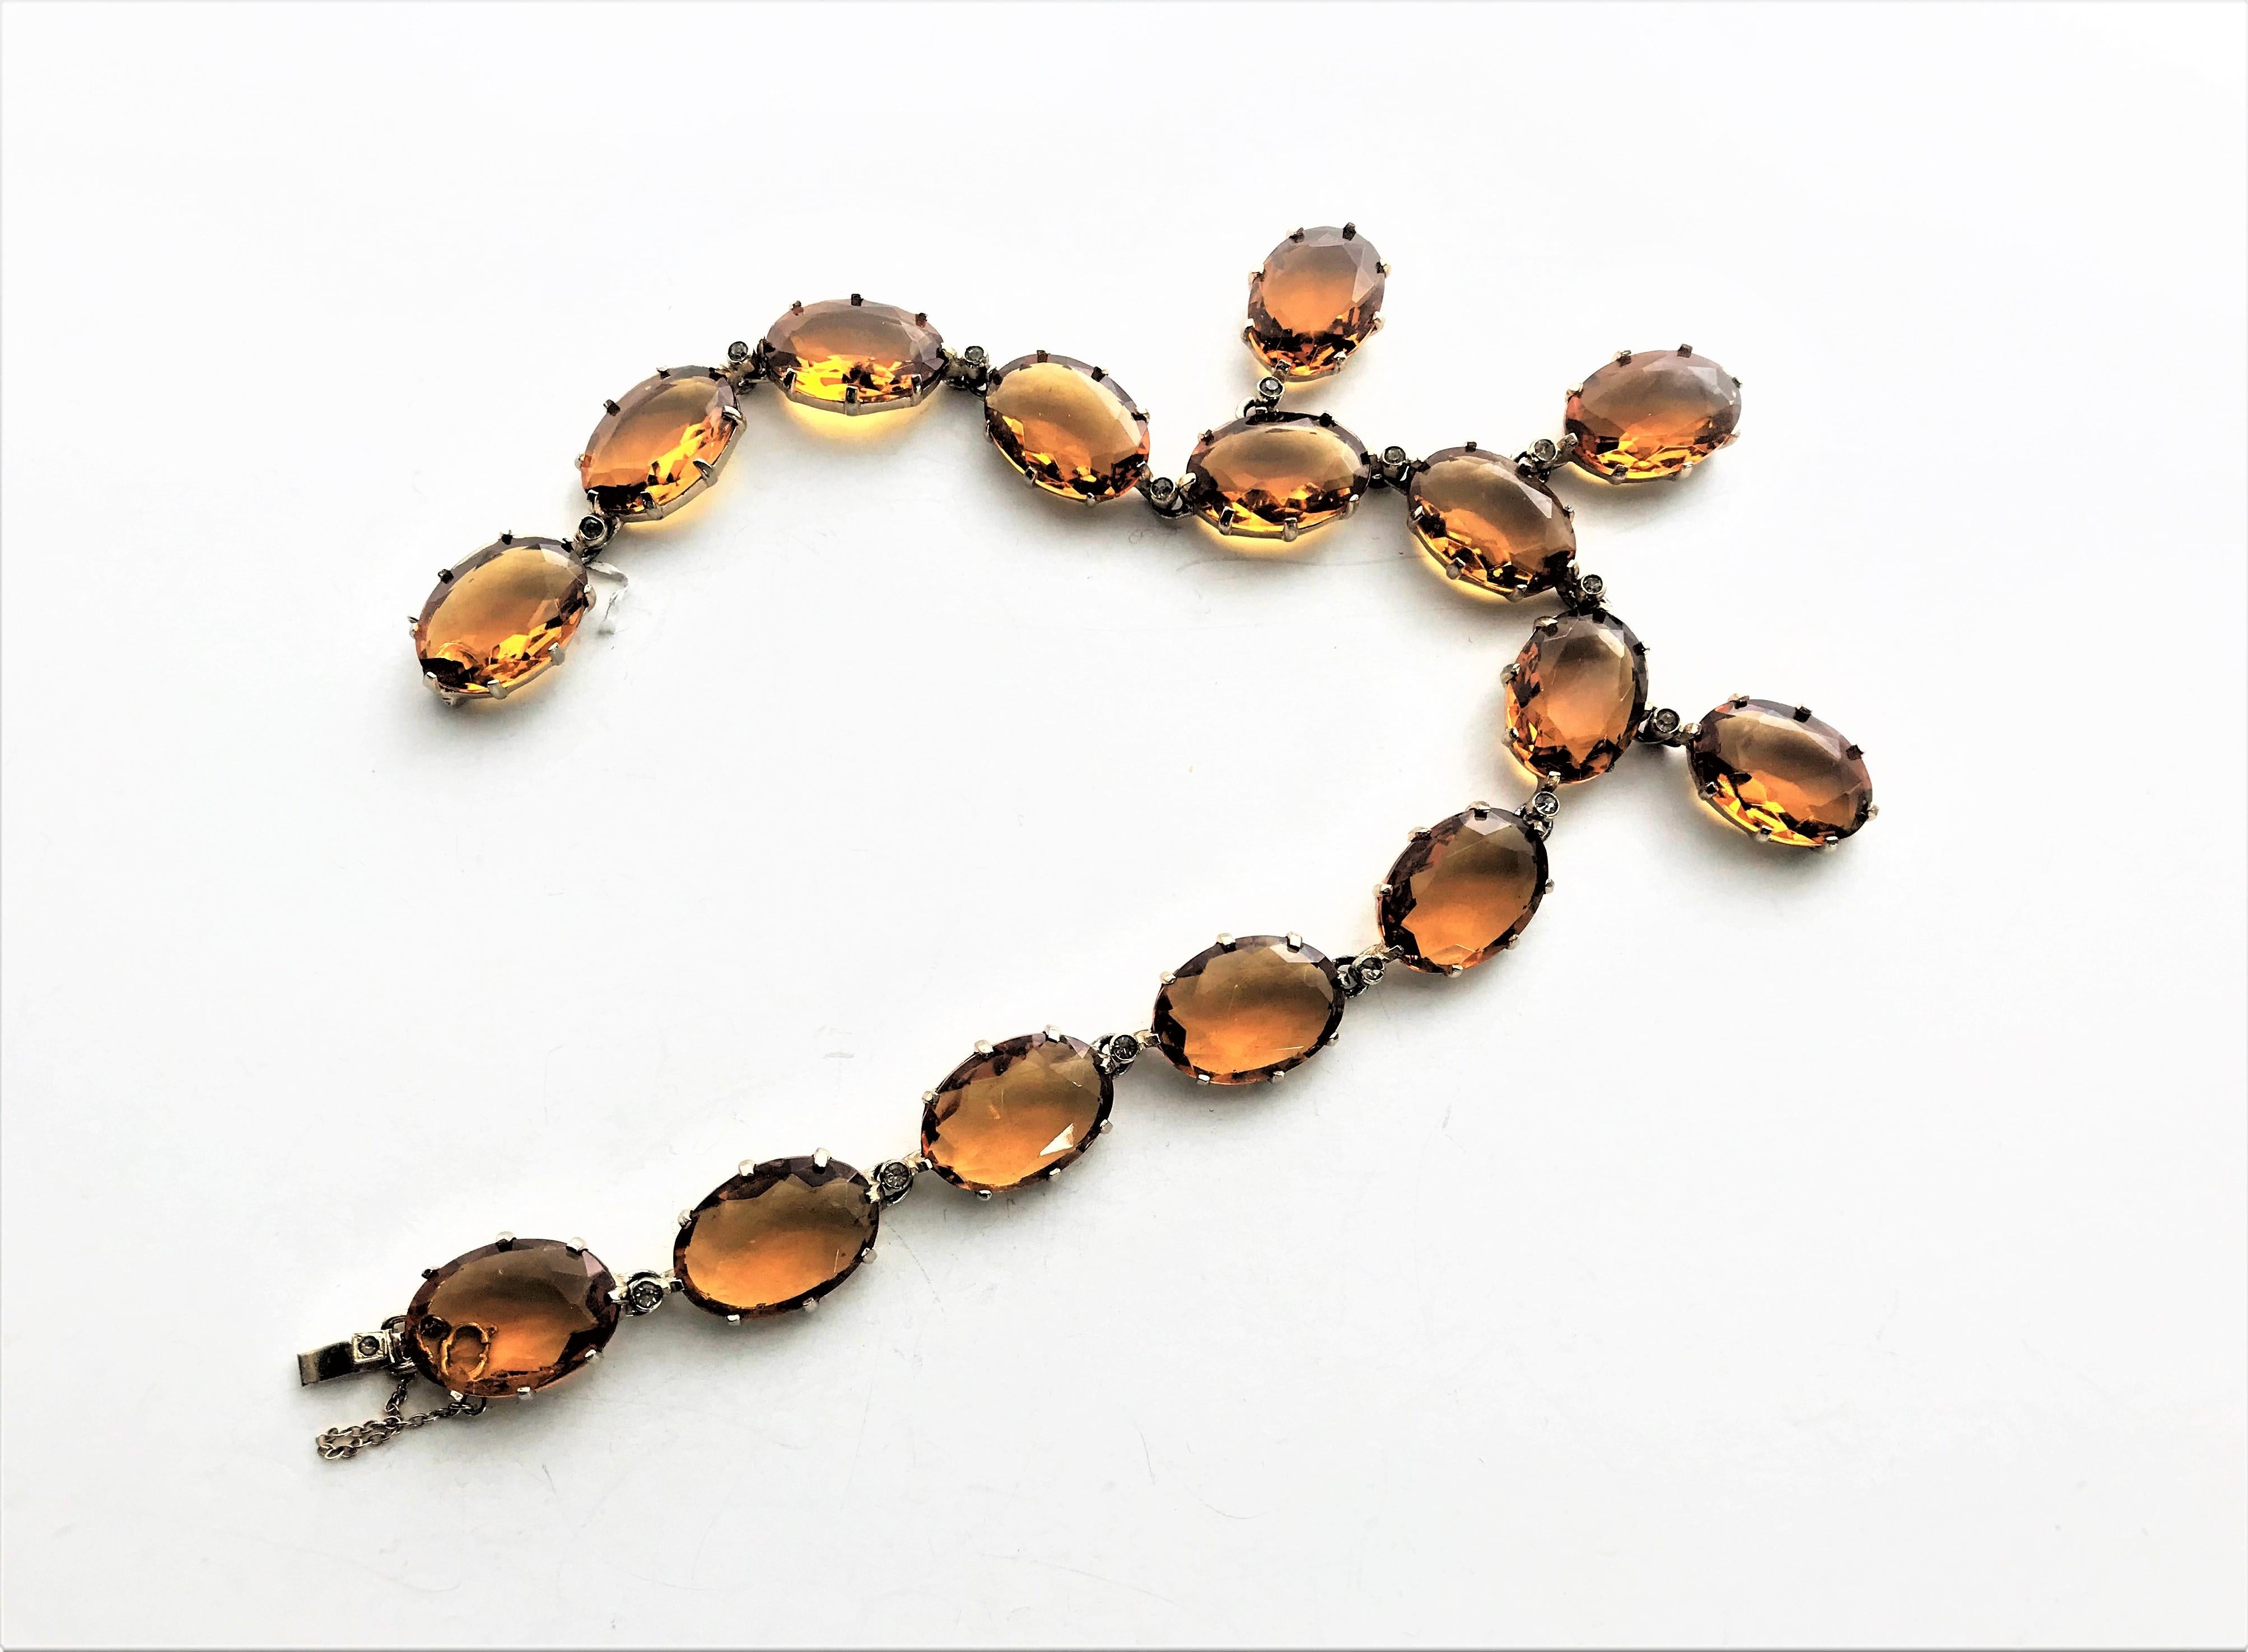 Women's Vintage necklace, amber colored rhinestones 1940s gold plated